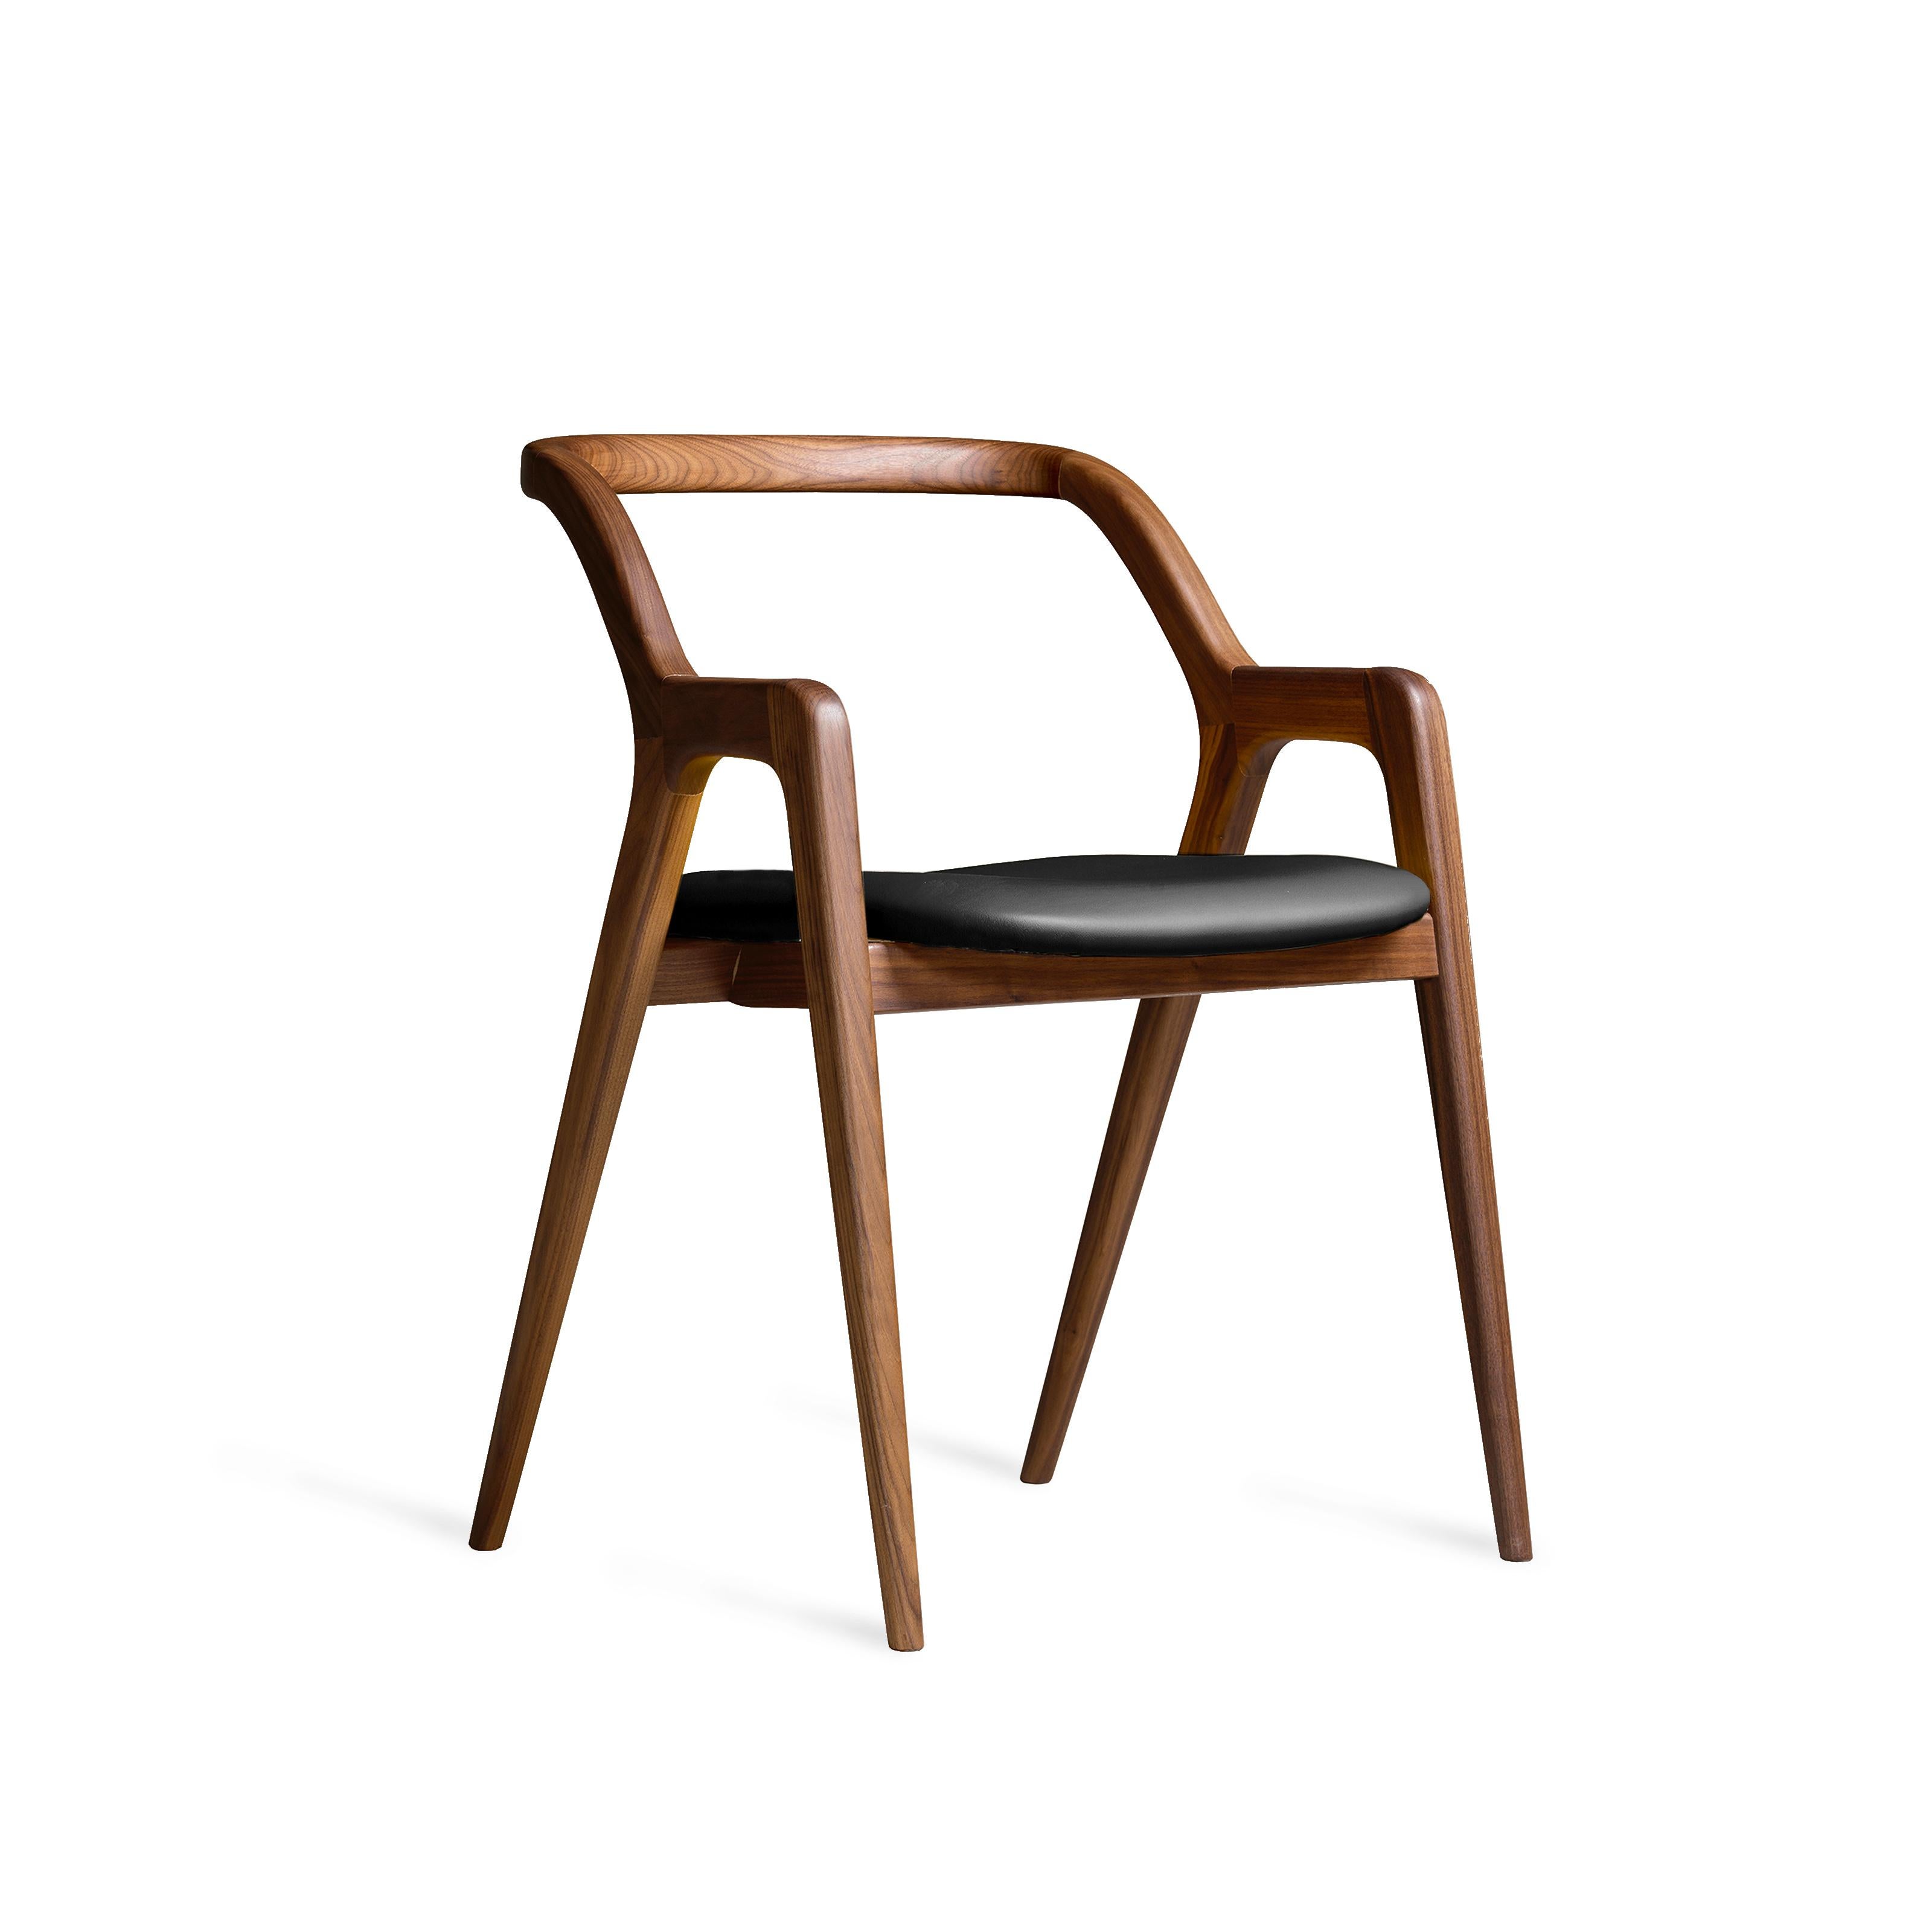 Italian In breve Solid Wood Chair, Walnut in Hand-Made Natural Finish, Contemporary For Sale